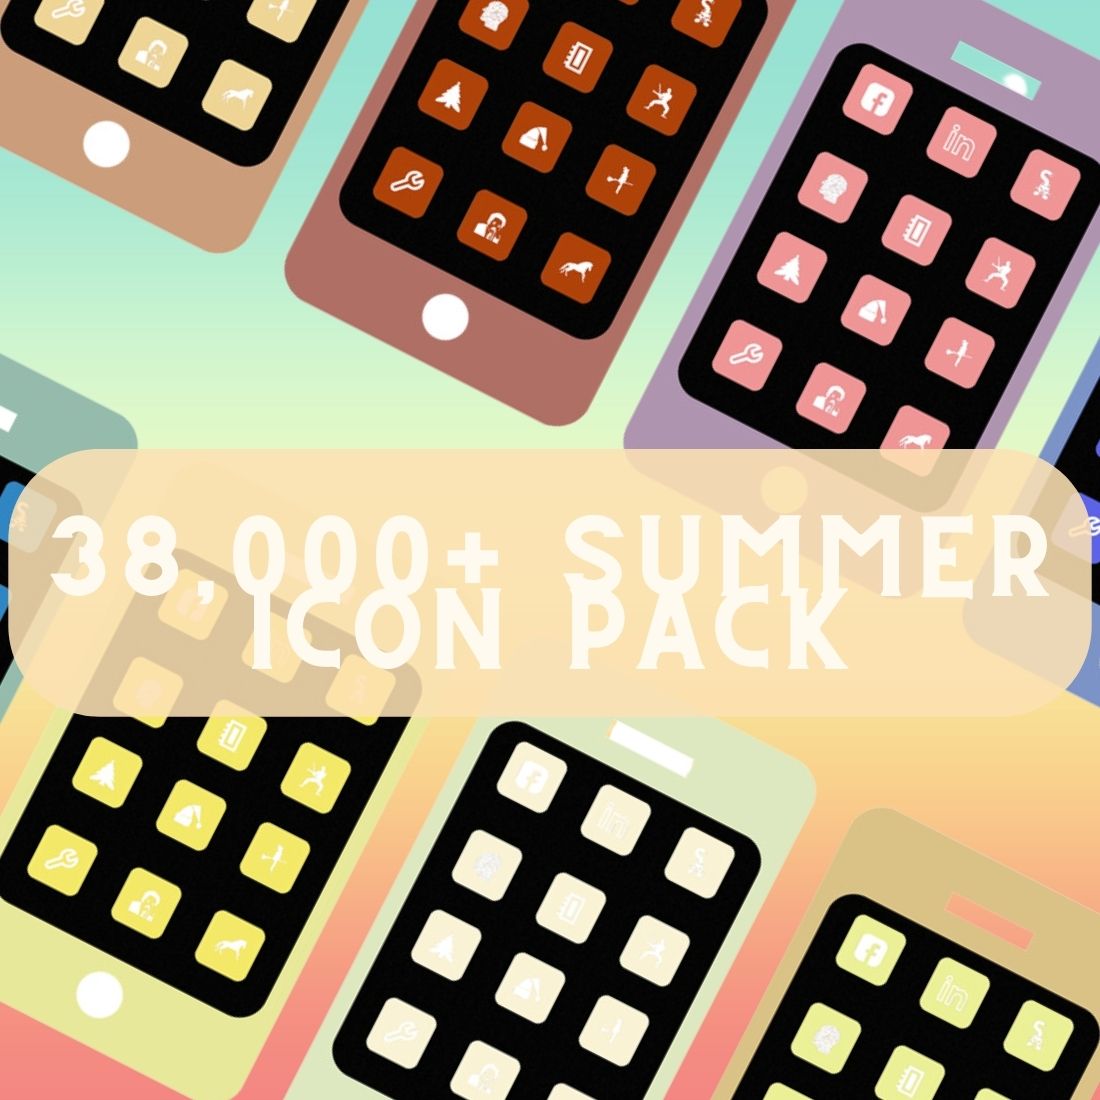 SUMMER ICONS PACK cover image.